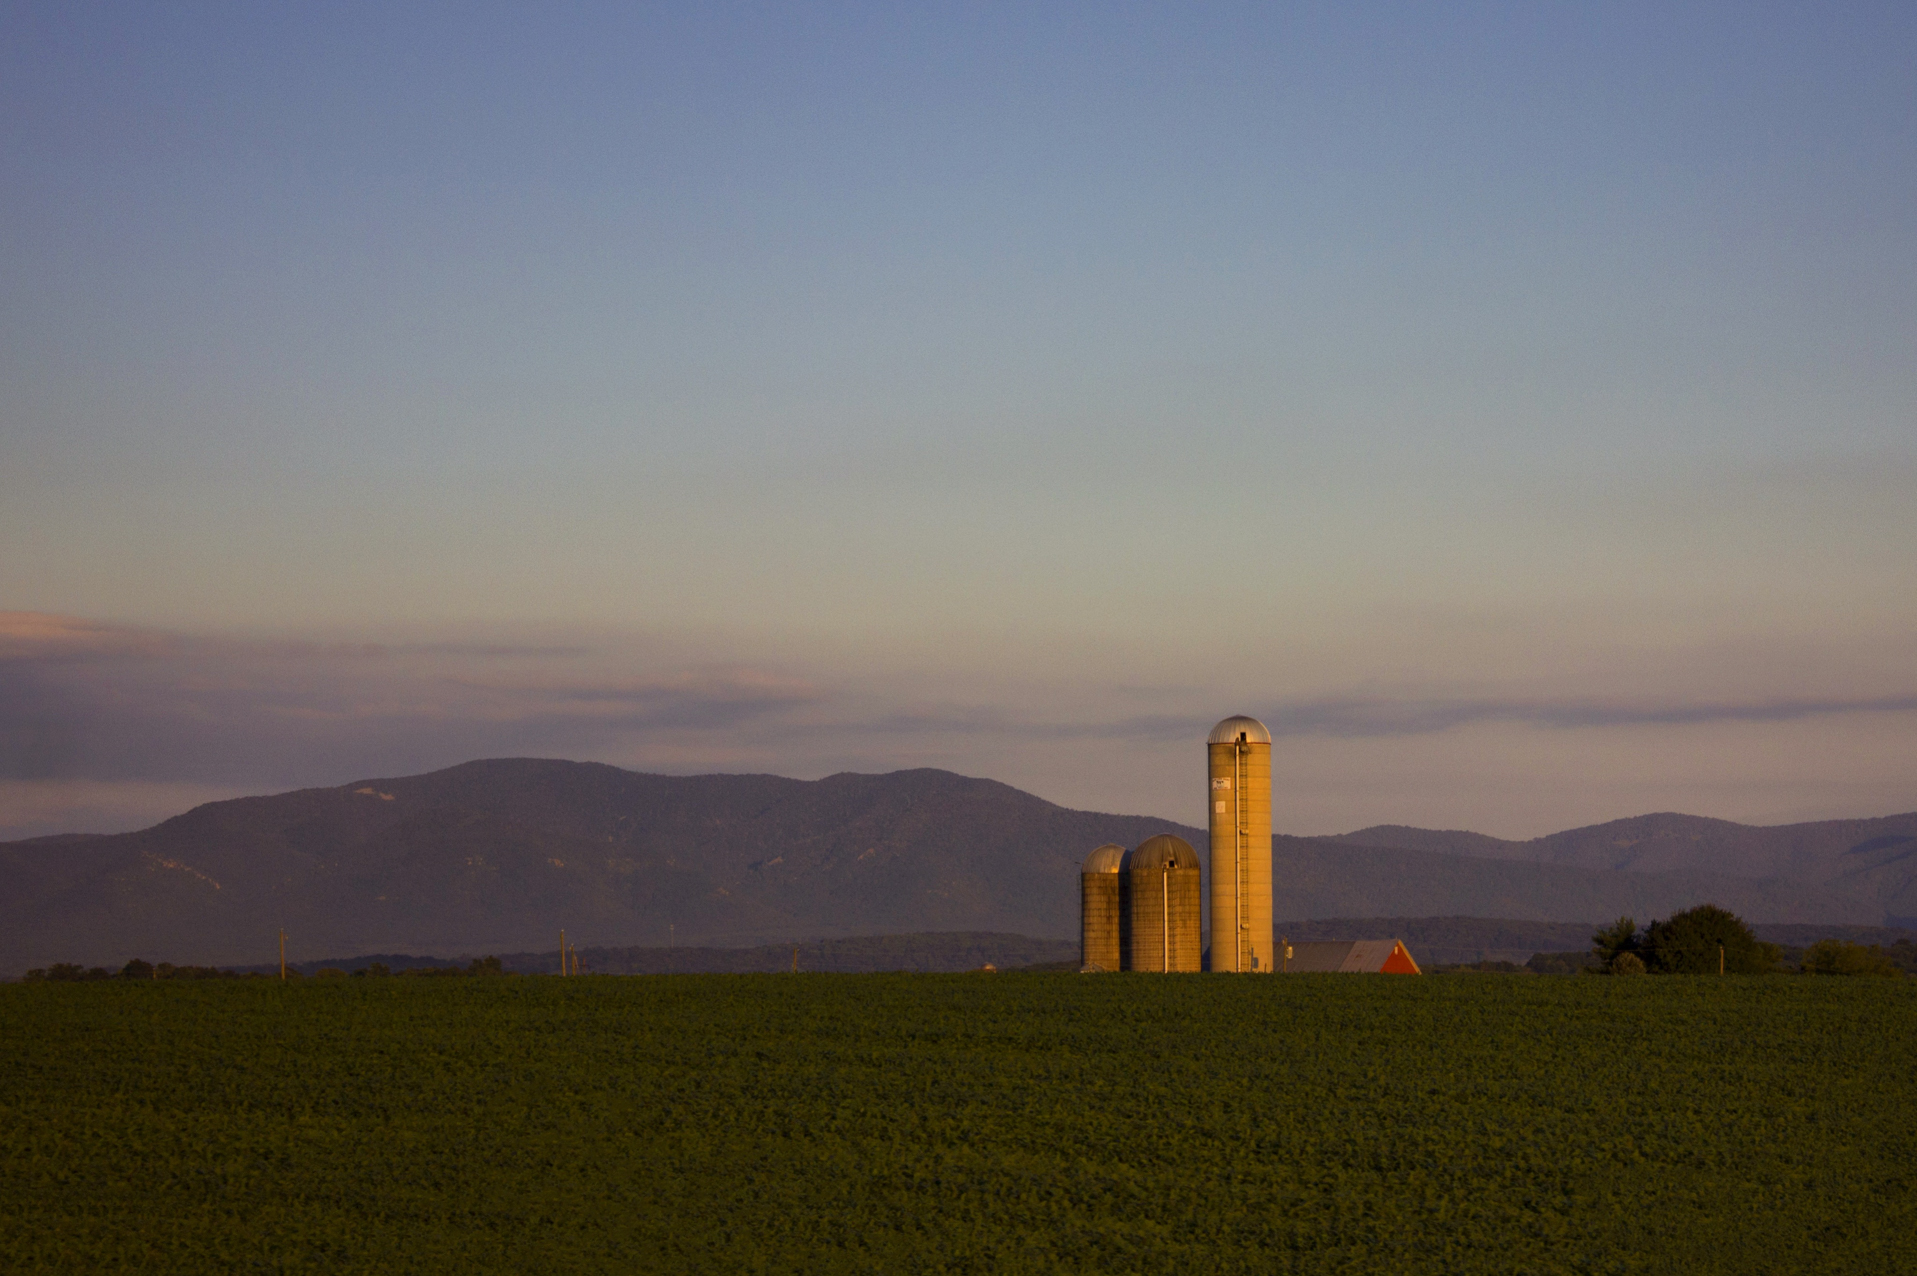 a farm with silos, somewhere in rural america, photographed by jamie bannon photography.